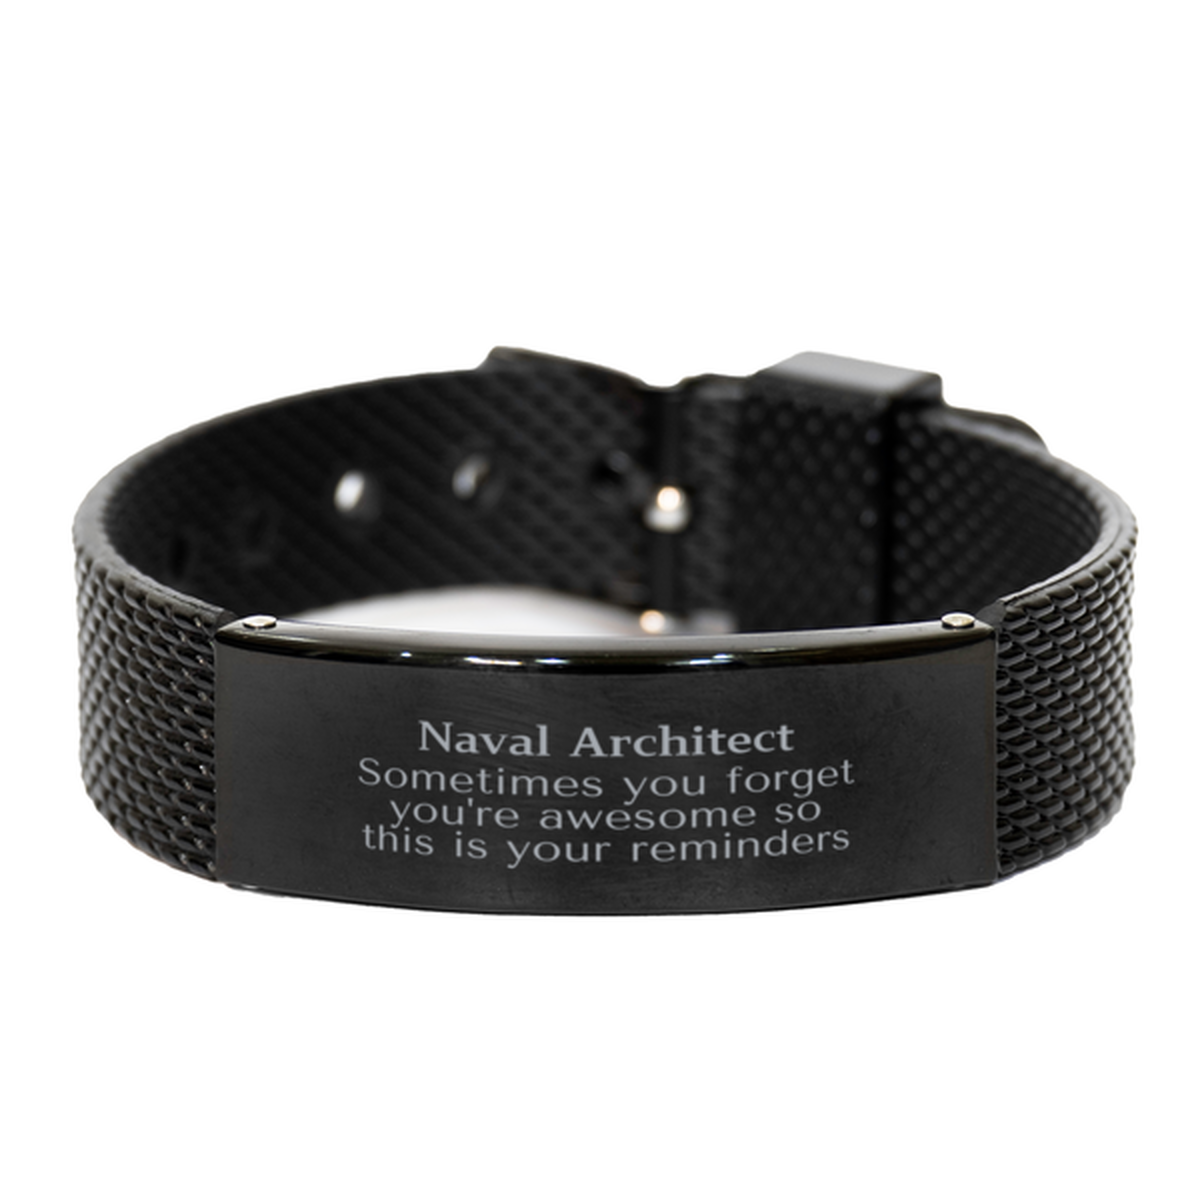 Sentimental Naval Architect Black Shark Mesh Bracelet, Naval Architect Sometimes you forget you're awesome so this is your reminders, Graduation Christmas Birthday Gifts for Naval Architect, Men, Women, Coworkers